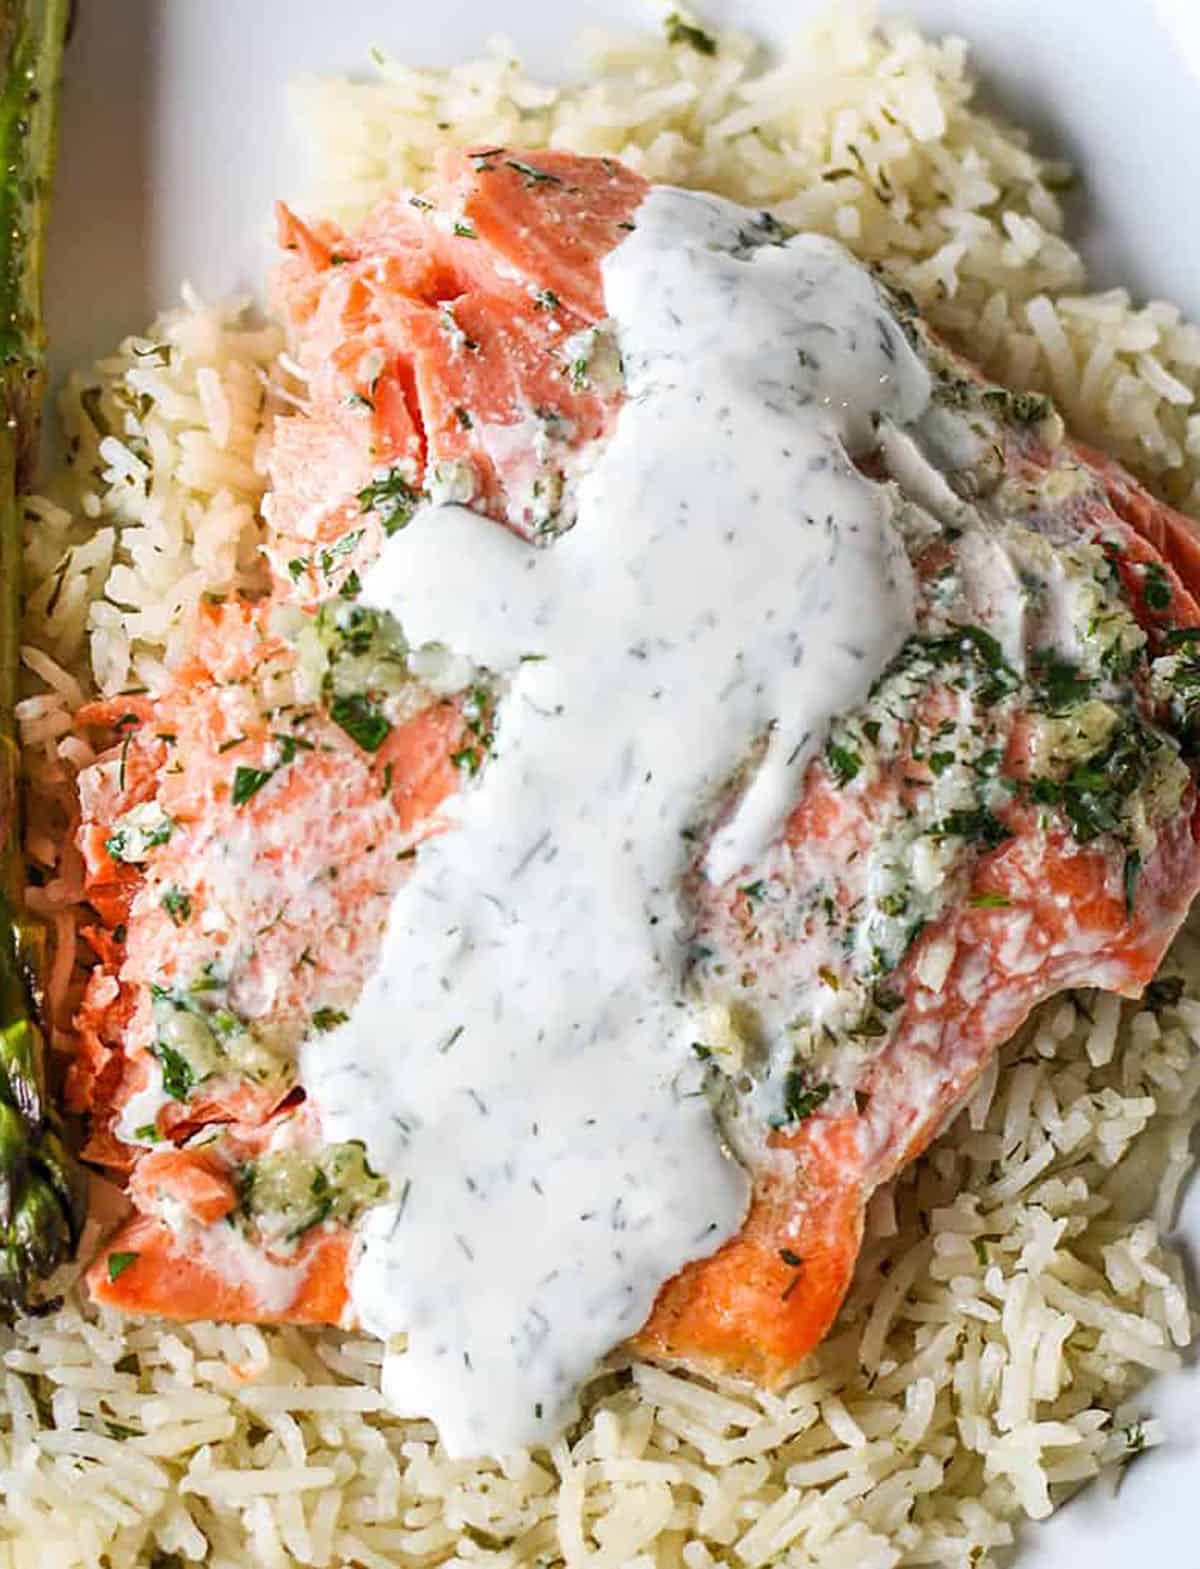 Baked salmon filet onto of rice with a creamy white sauce. 